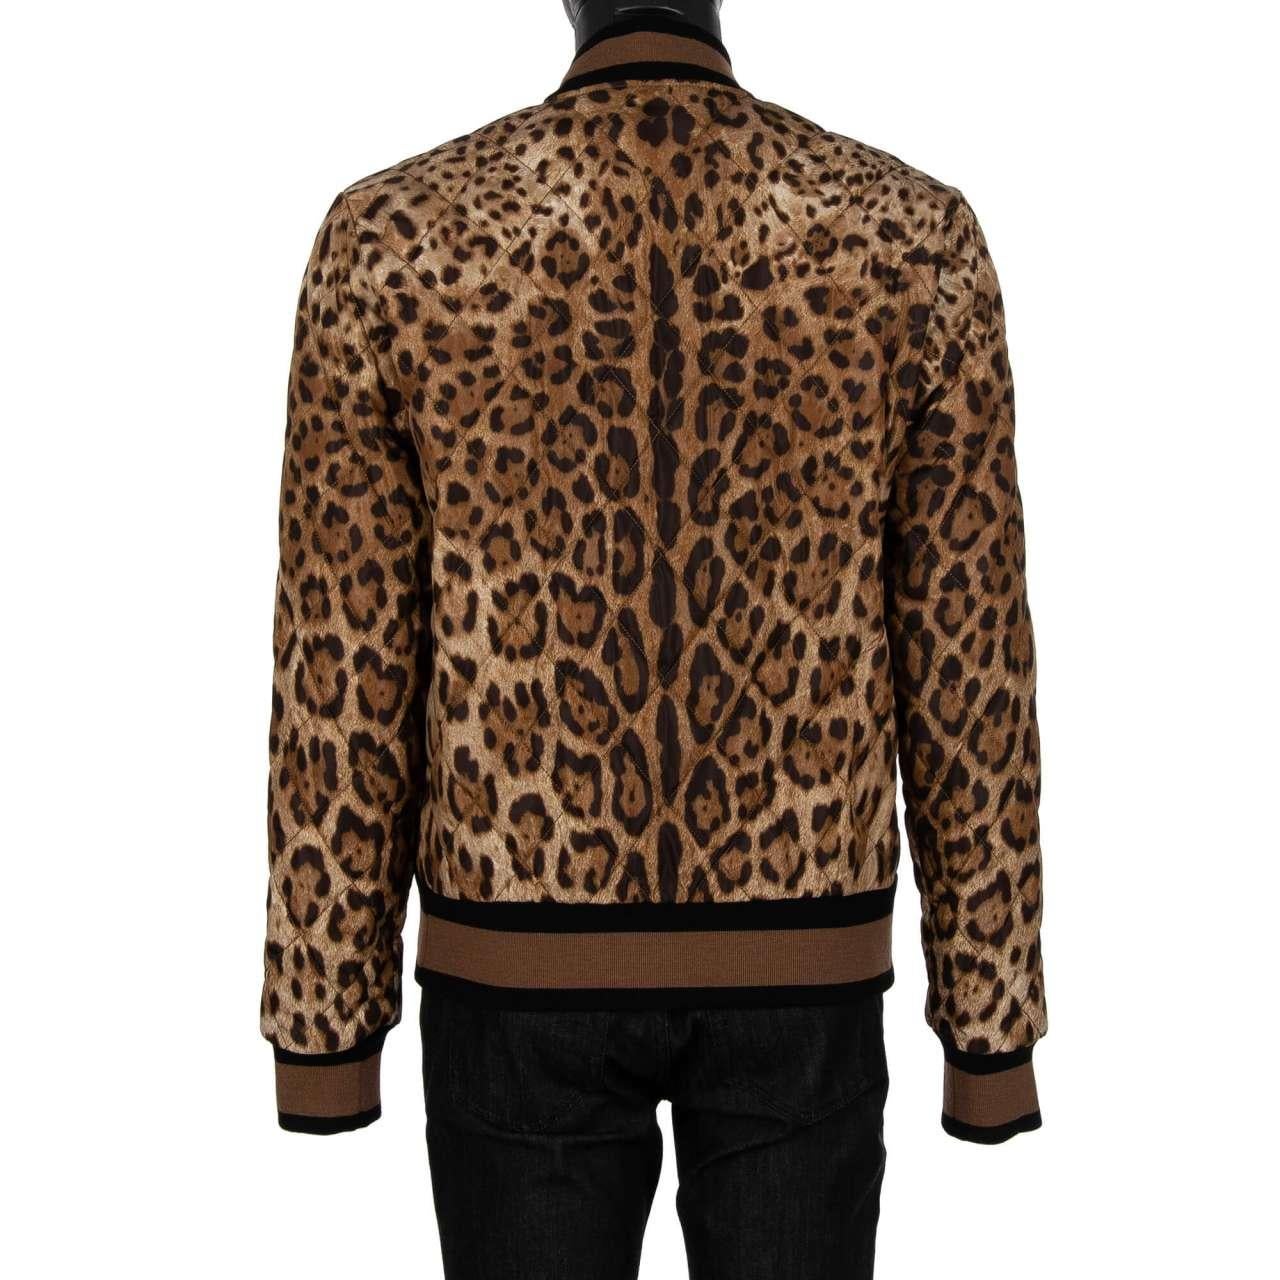 D&G Quilted Leopard Printed Nylon Bomber Jacket with DG Logo Brown Black 52 For Sale 1